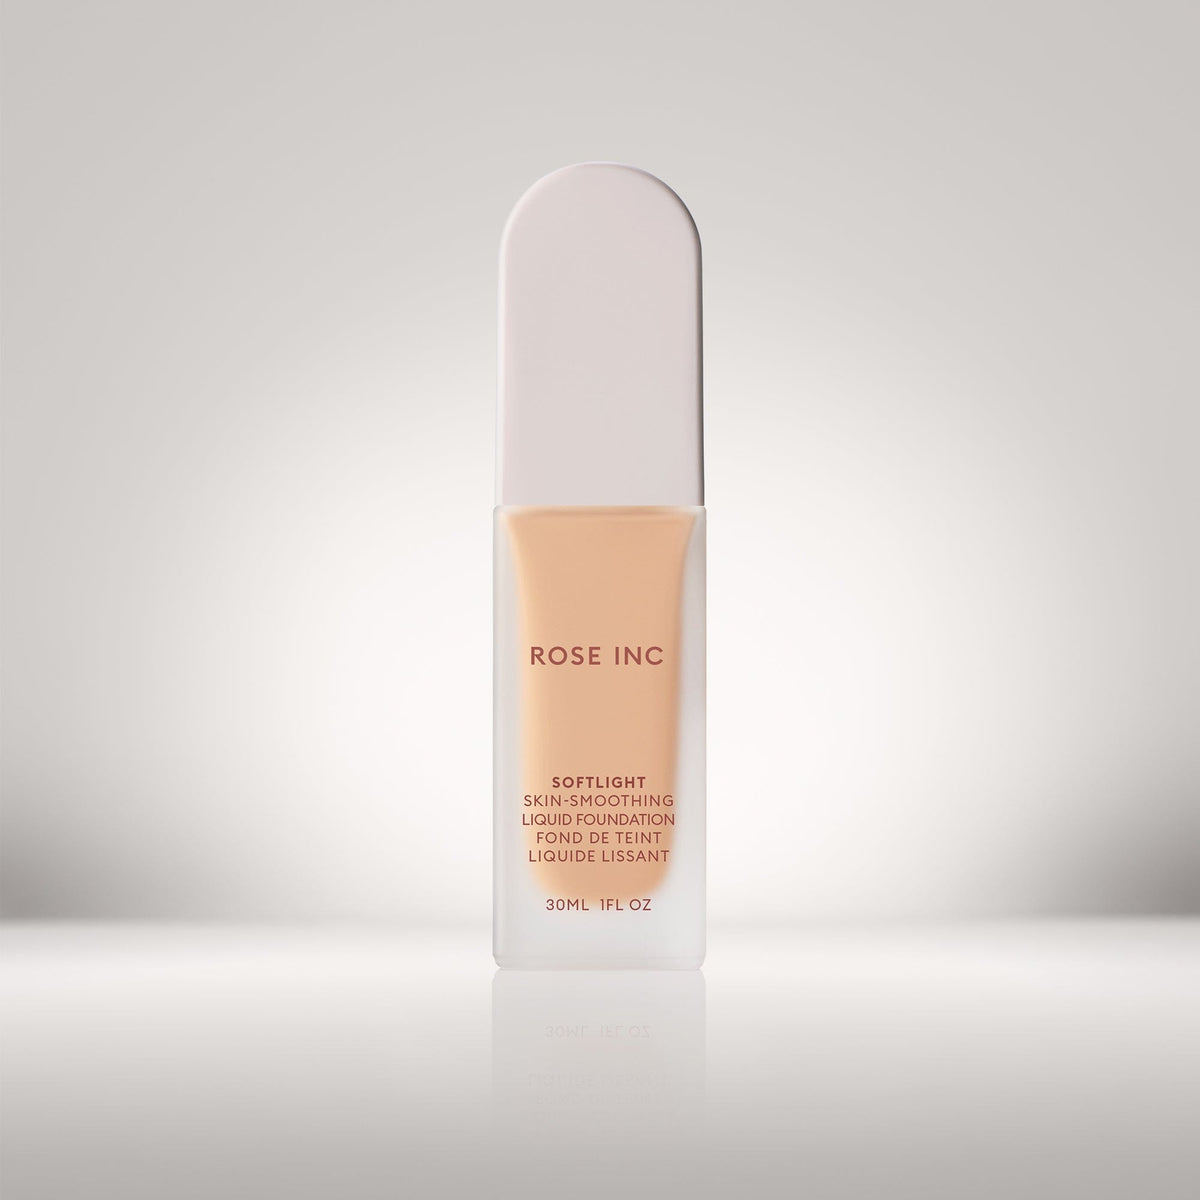 Soldier image of shade 10N in Softlight Smoothing Foundation